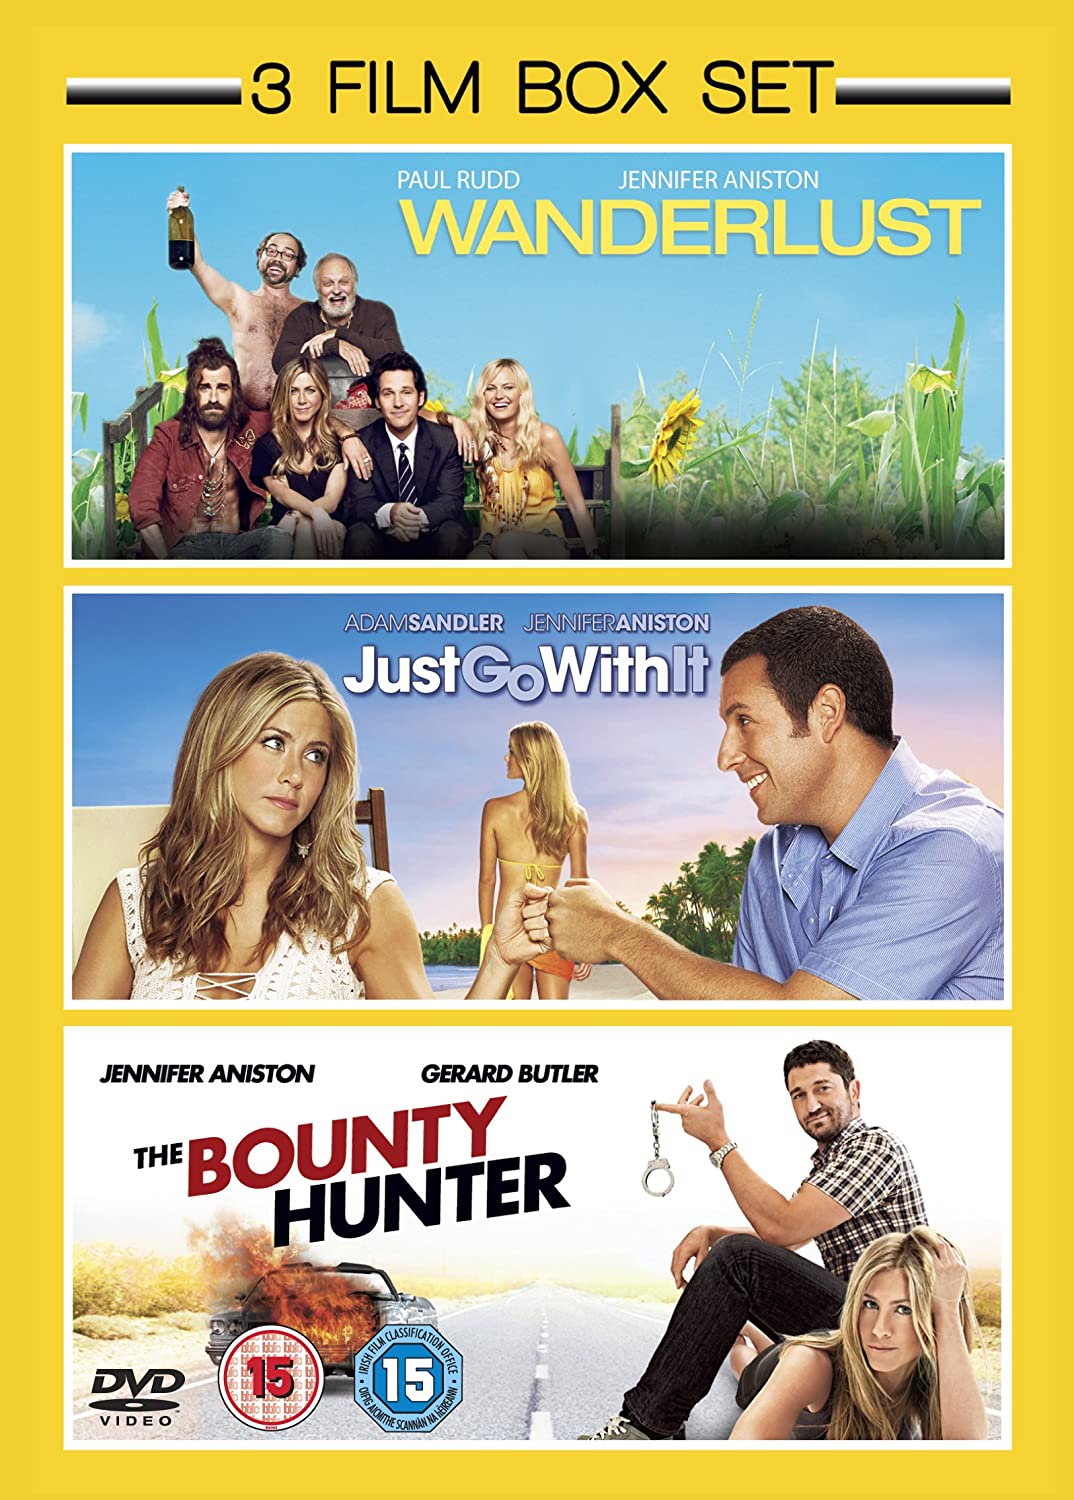 Just Go with It (2011) / Wanderlust (2012) / The Bounty Hunter (2010) – Triple P – Rom-com [DVD]